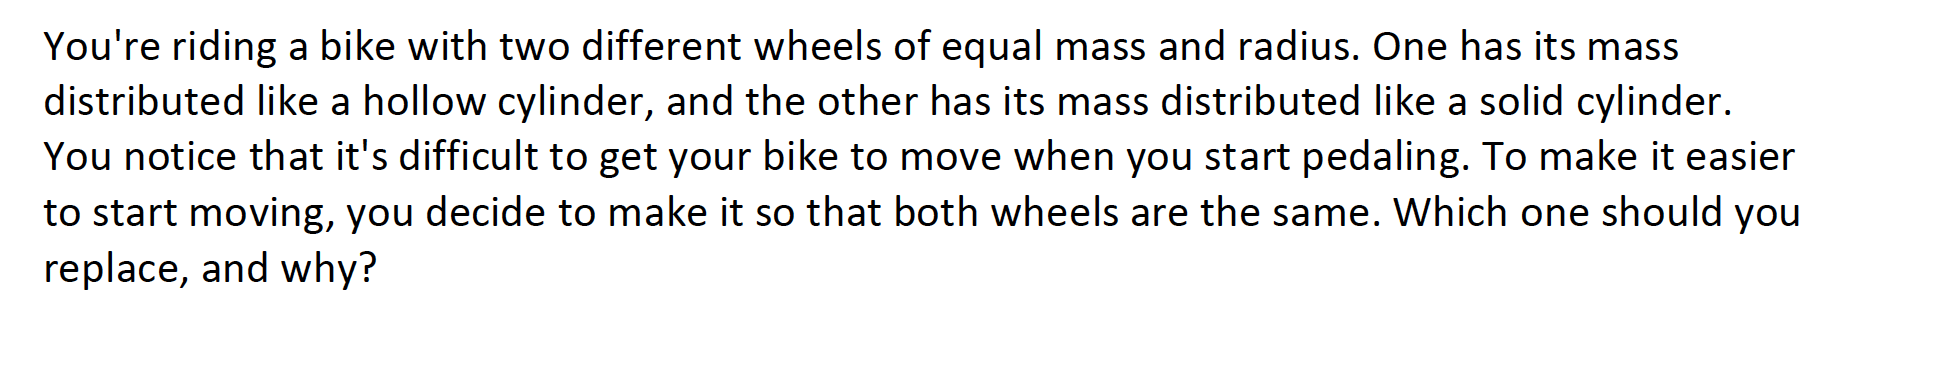 You're riding a bike with two different wheels of equal mass and radius. One has its mass
distributed like a hollow cylinder, and the other has its mass distributed like a solid cylinder.
You notice that it's difficult to get your bike to move when you start pedaling. To make it easier
to start moving, you decide to make it so that both wheels are the same. Which one should you
replace, and why?
